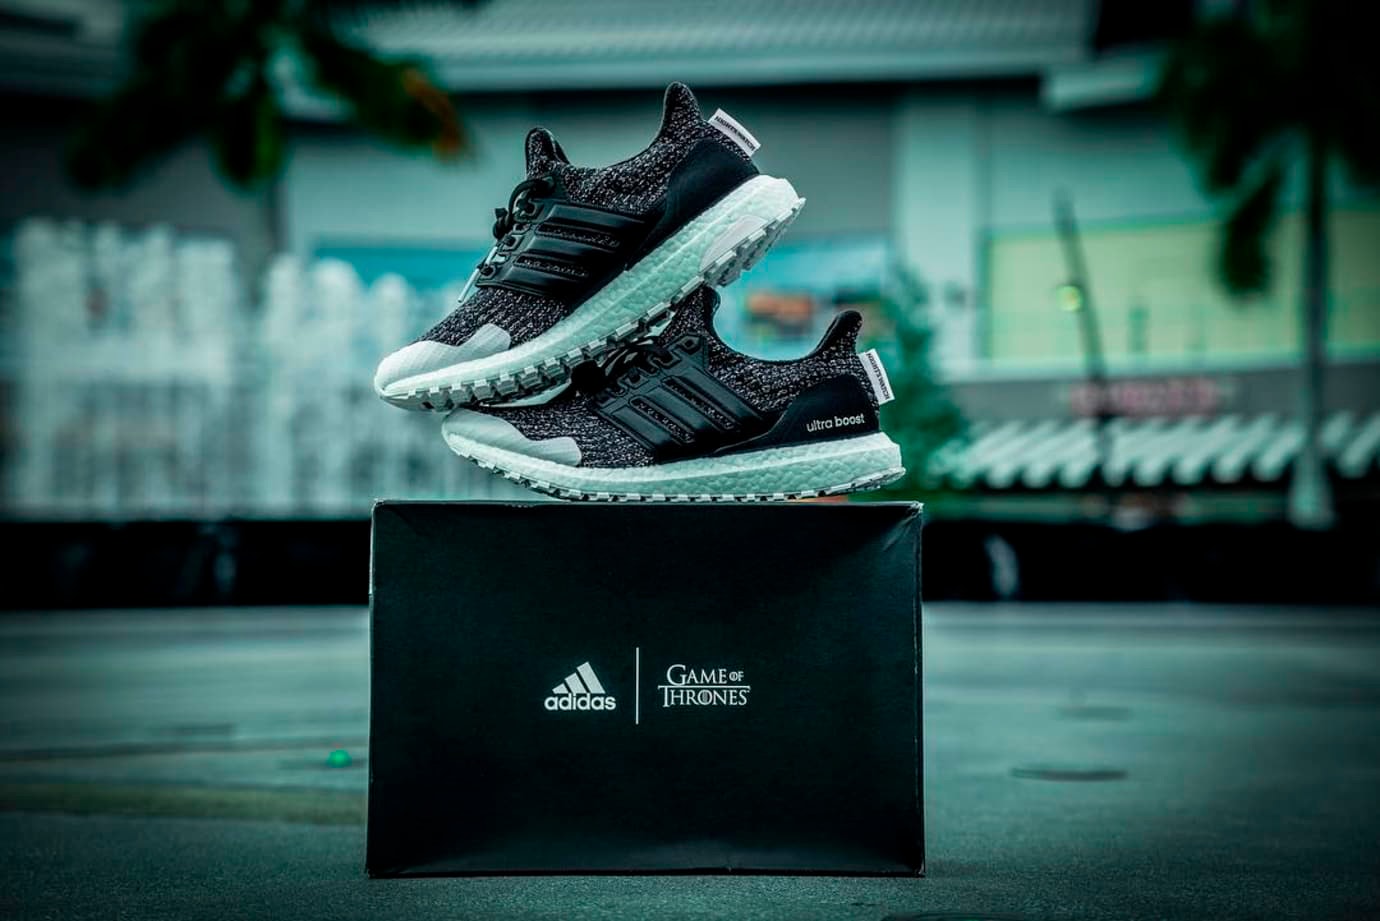 'Game of Thrones' x adidas UltraBOOST "Night's Watch" first look release got hbo jon snow